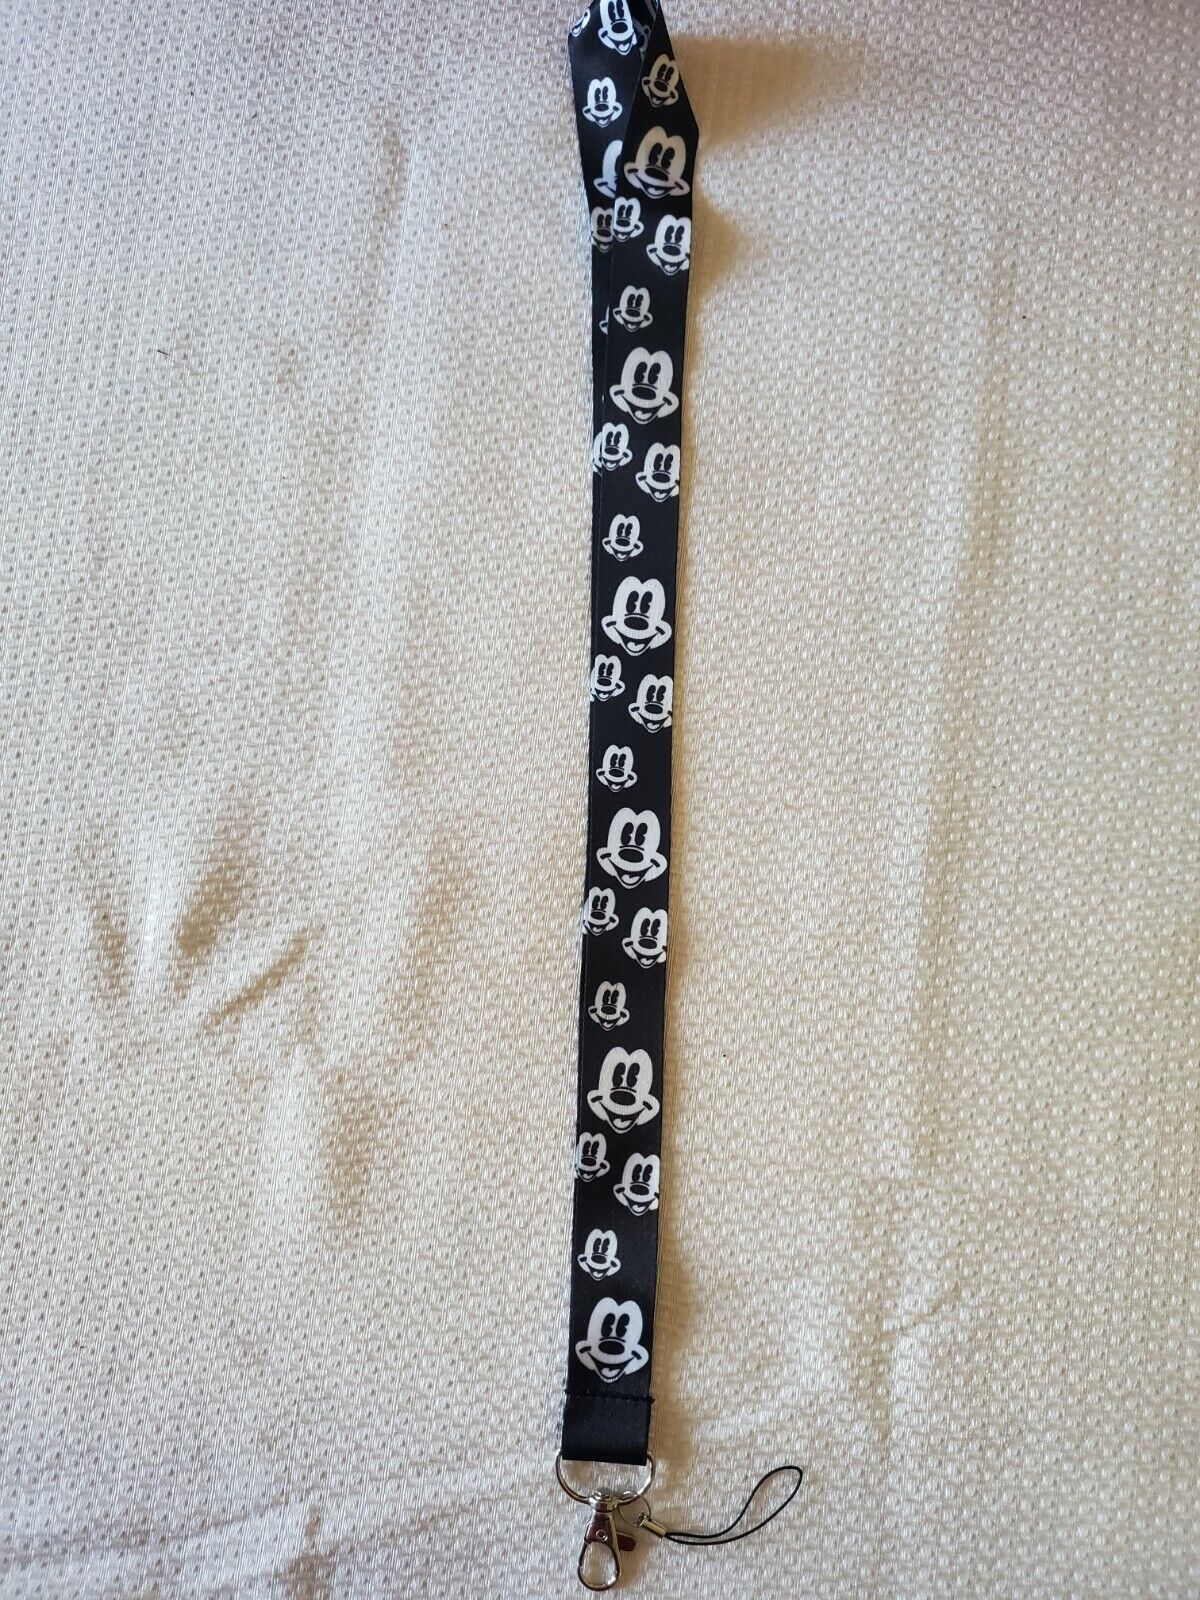 Disney Pin Lanyard - Buy 1 and Select Another 1 Free 